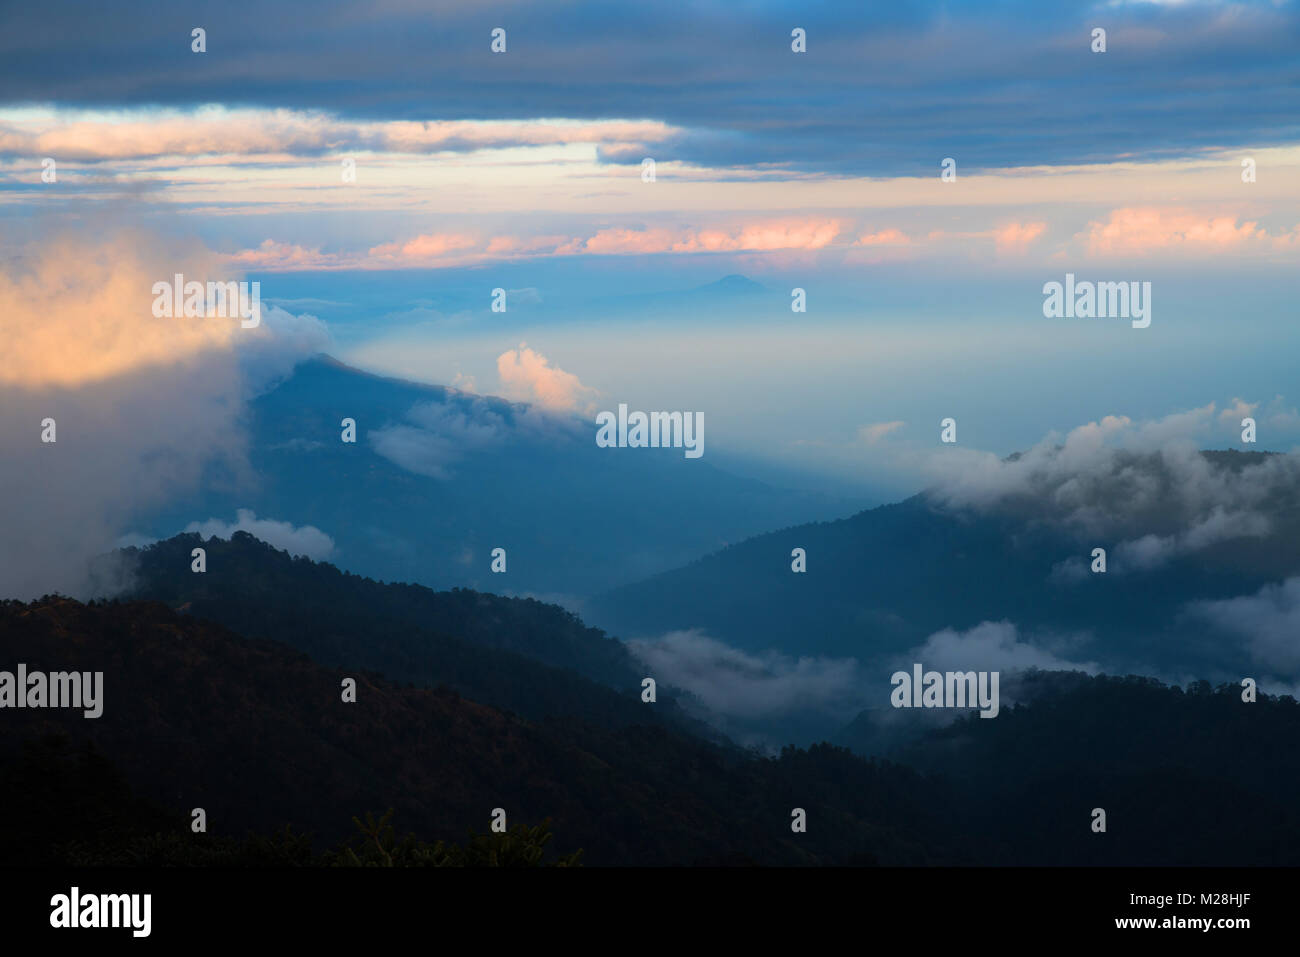 Dramatic landscape with colorful from sunlight at Sandakphu, north of India Stock Photo